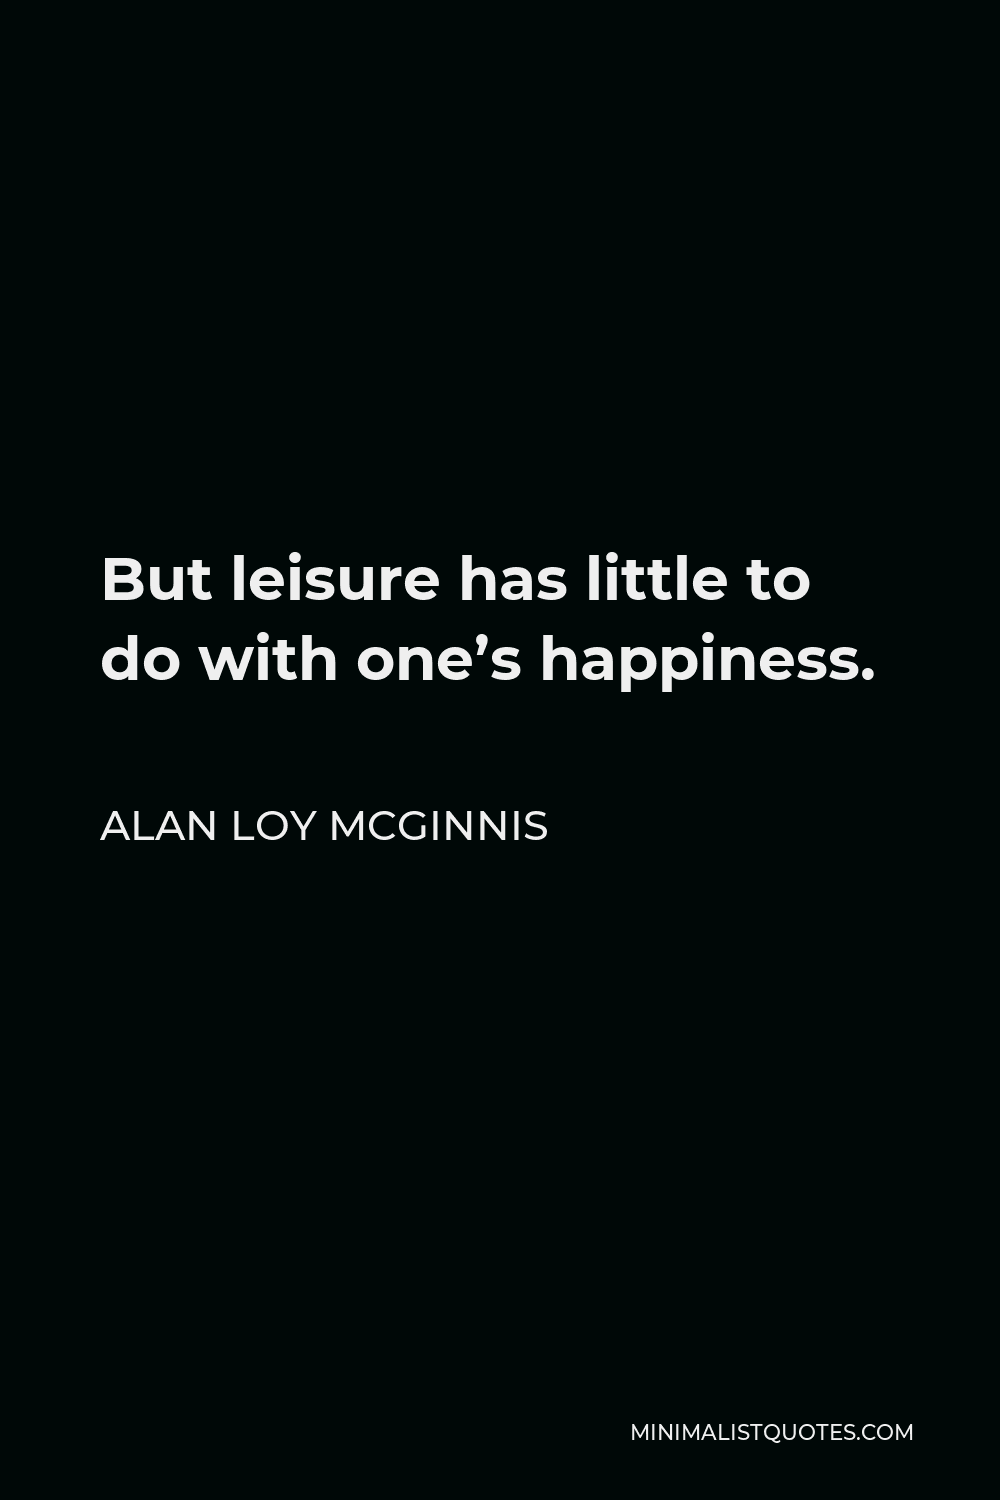 Alan Loy McGinnis Quote - But leisure has little to do with one’s happiness.